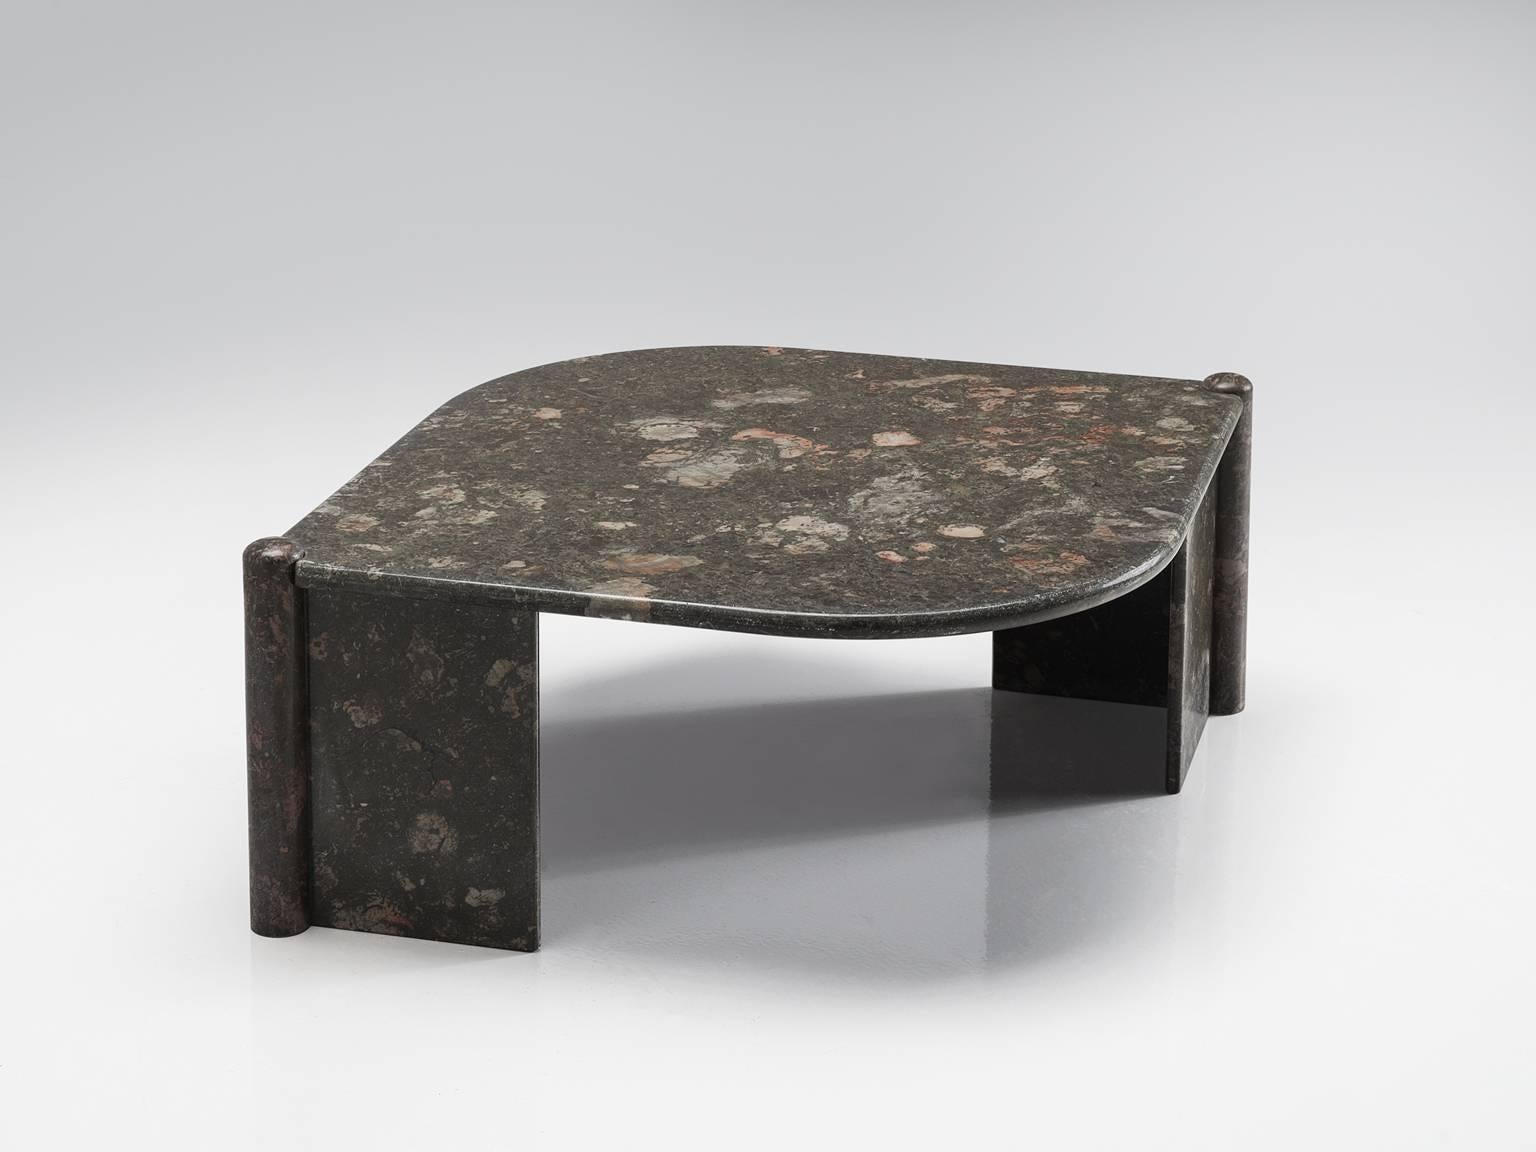 Cocktail table, marble, Italy, 1970s.

This sculptural table has an eye-shaped top and two open triangles that face one another. The circular ends of the base locks the top by means of gravity. The construction is so smoothly designed that